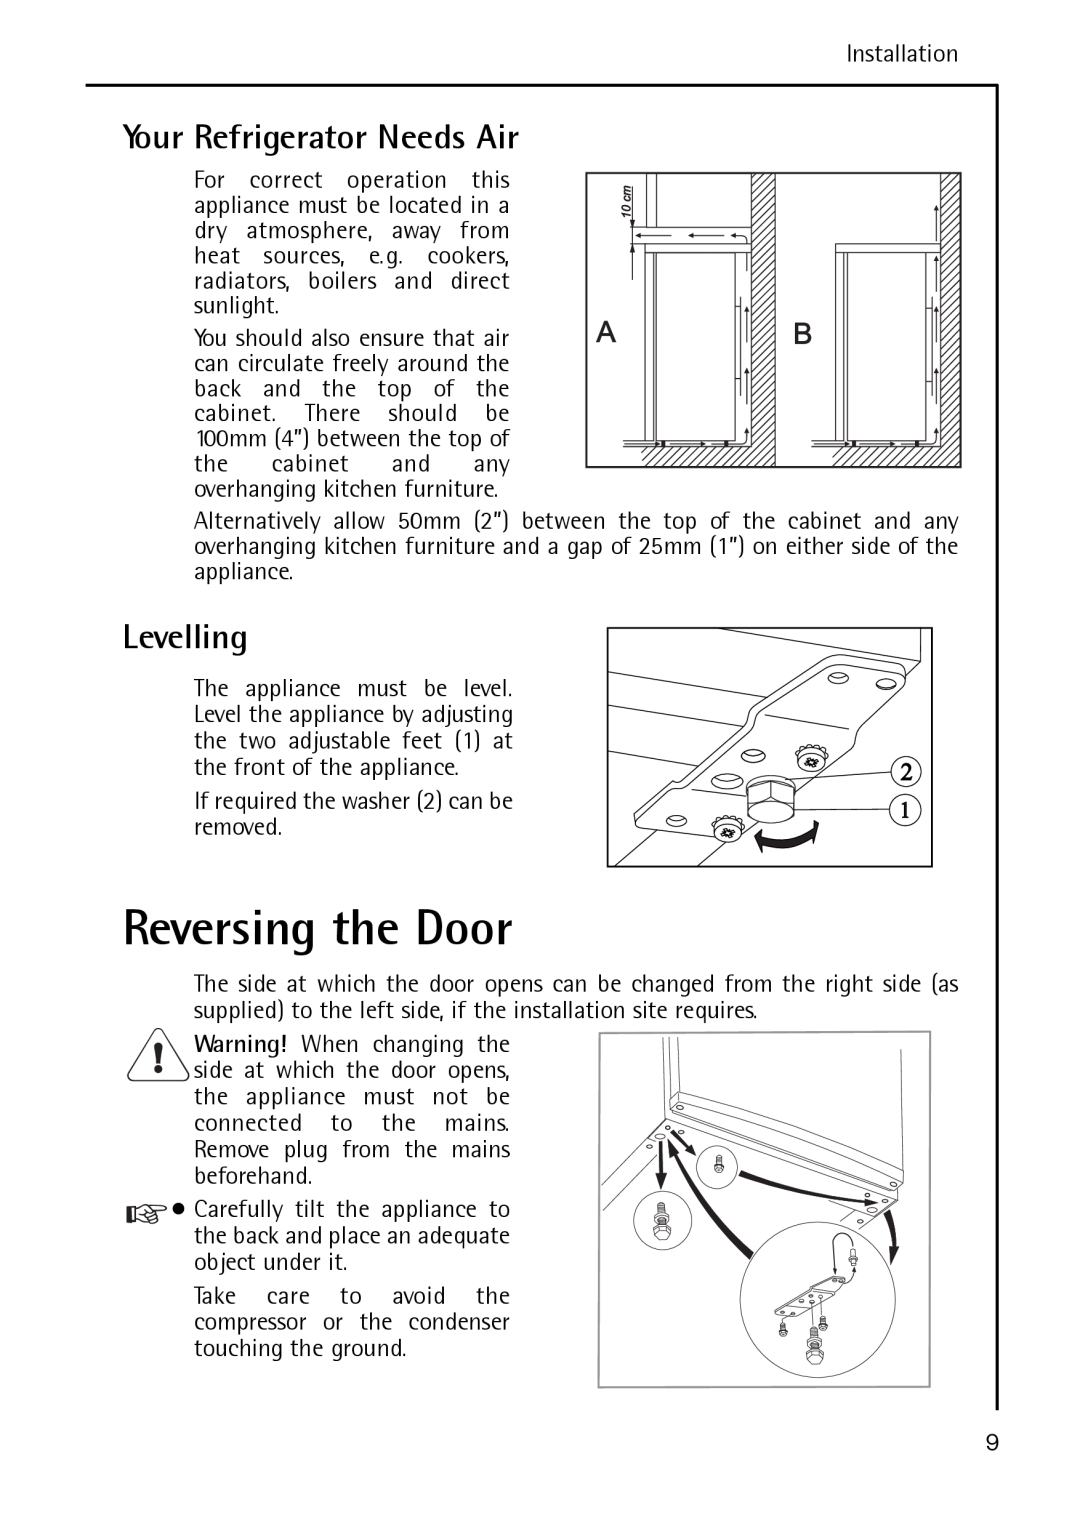 Electrolux S 70178 TK38 manual Reversing the Door, Your Refrigerator Needs Air, Levelling 